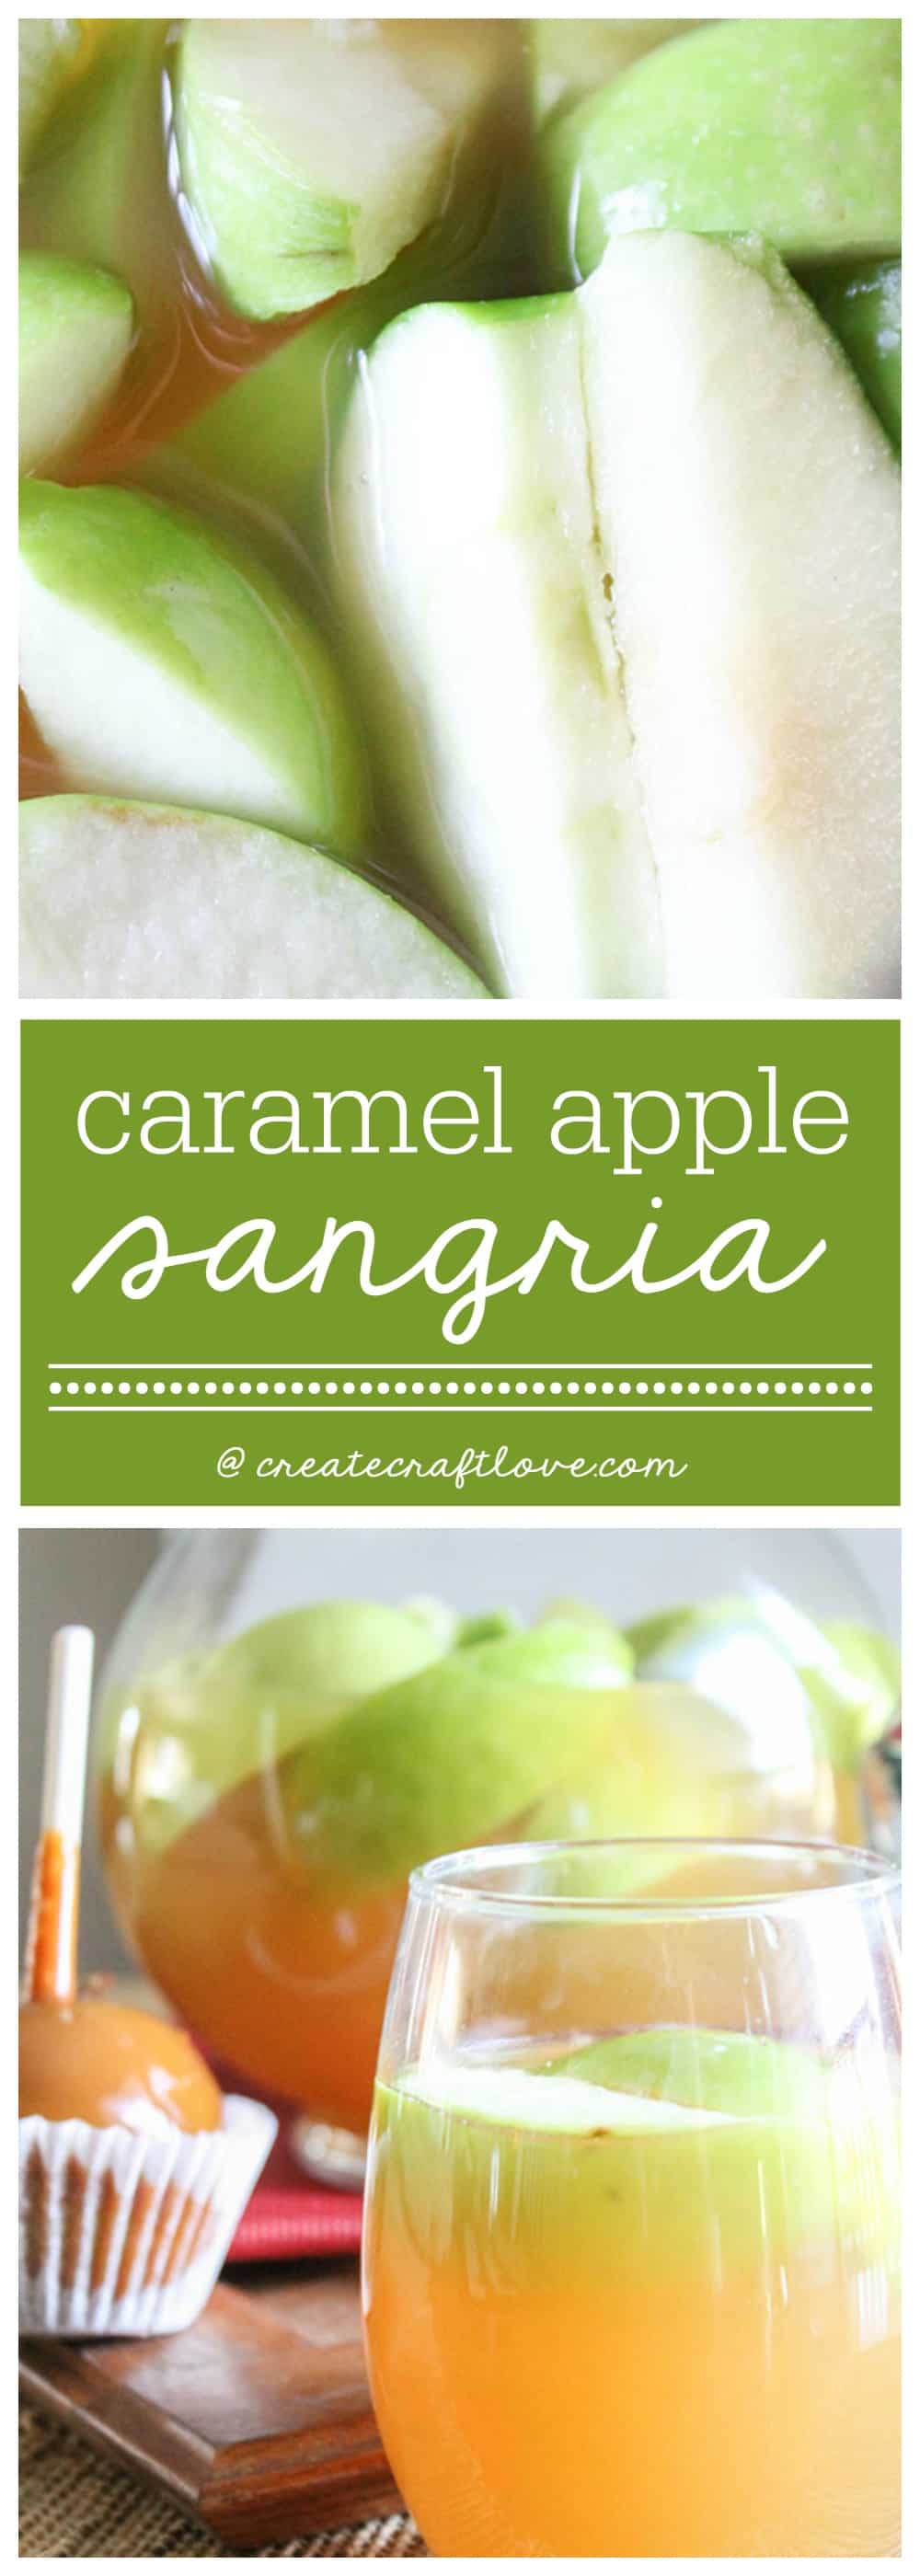 This Caramel Apple Sangria mingles your favorite fall flavors into one amazing adult beverage!